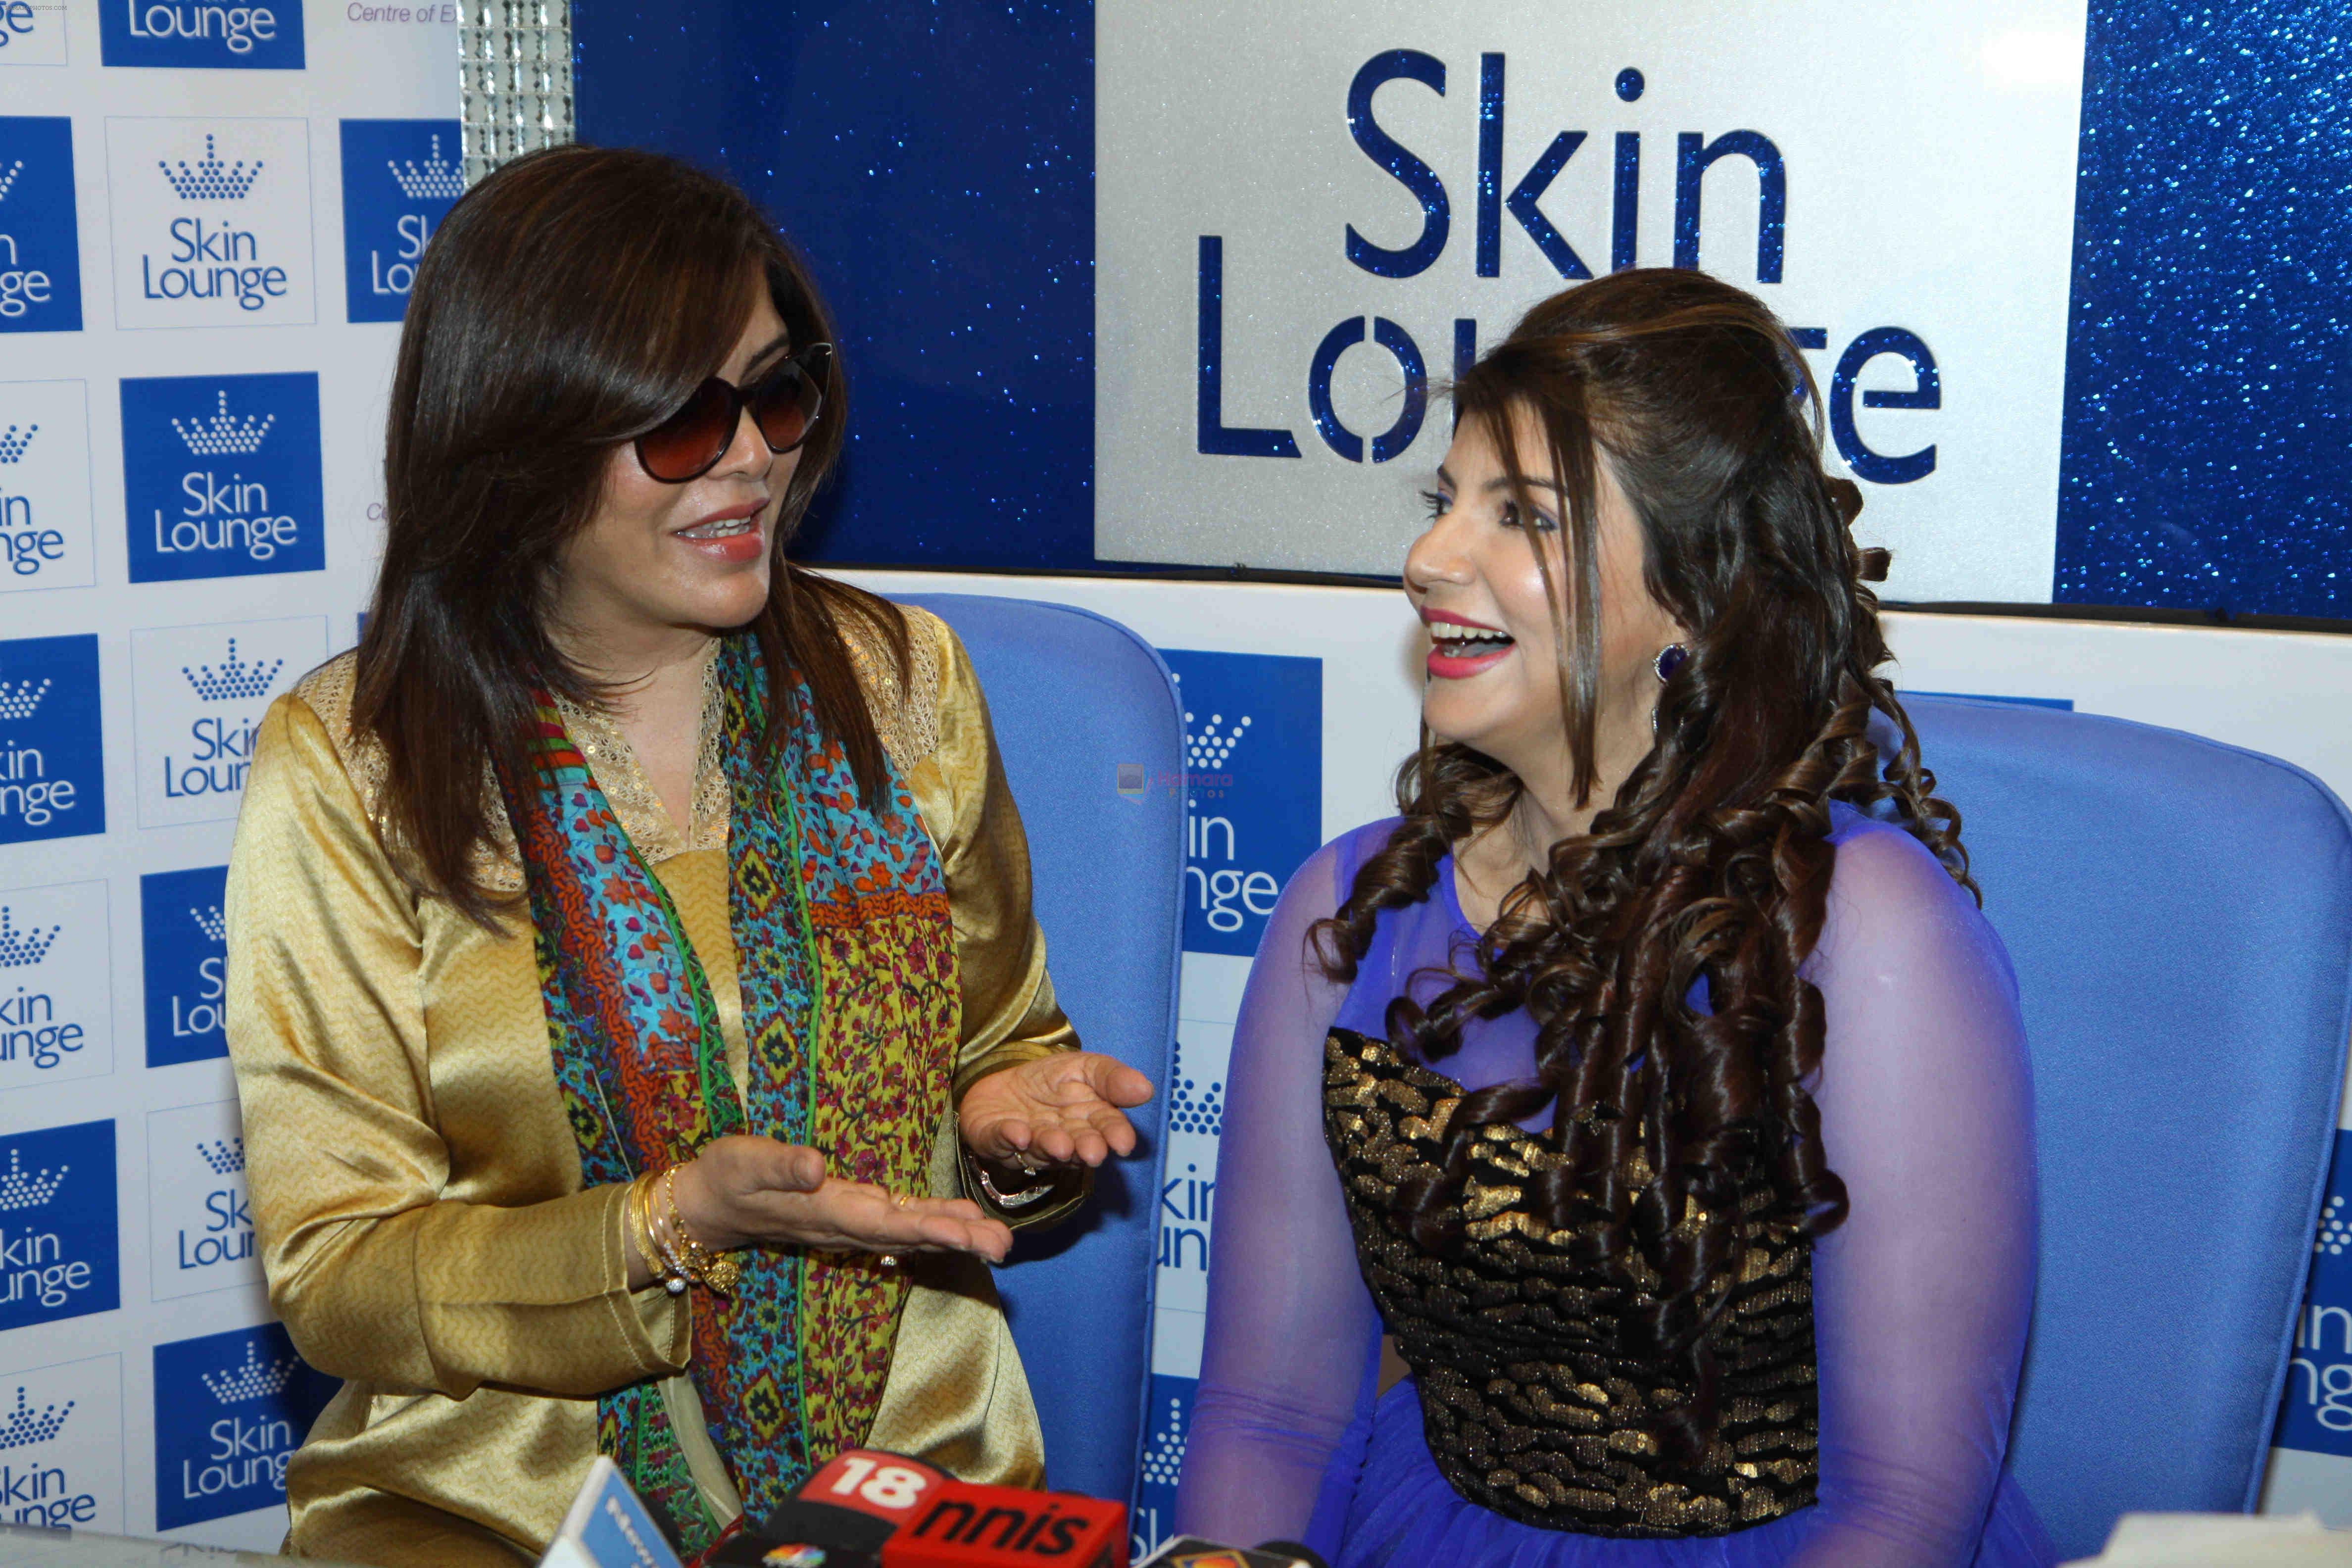 Zeenat Aman inaugurates Dr. Simple Aher's clinic Skin Lounge in Lokhandwala, Andheri West on 15th March 2015